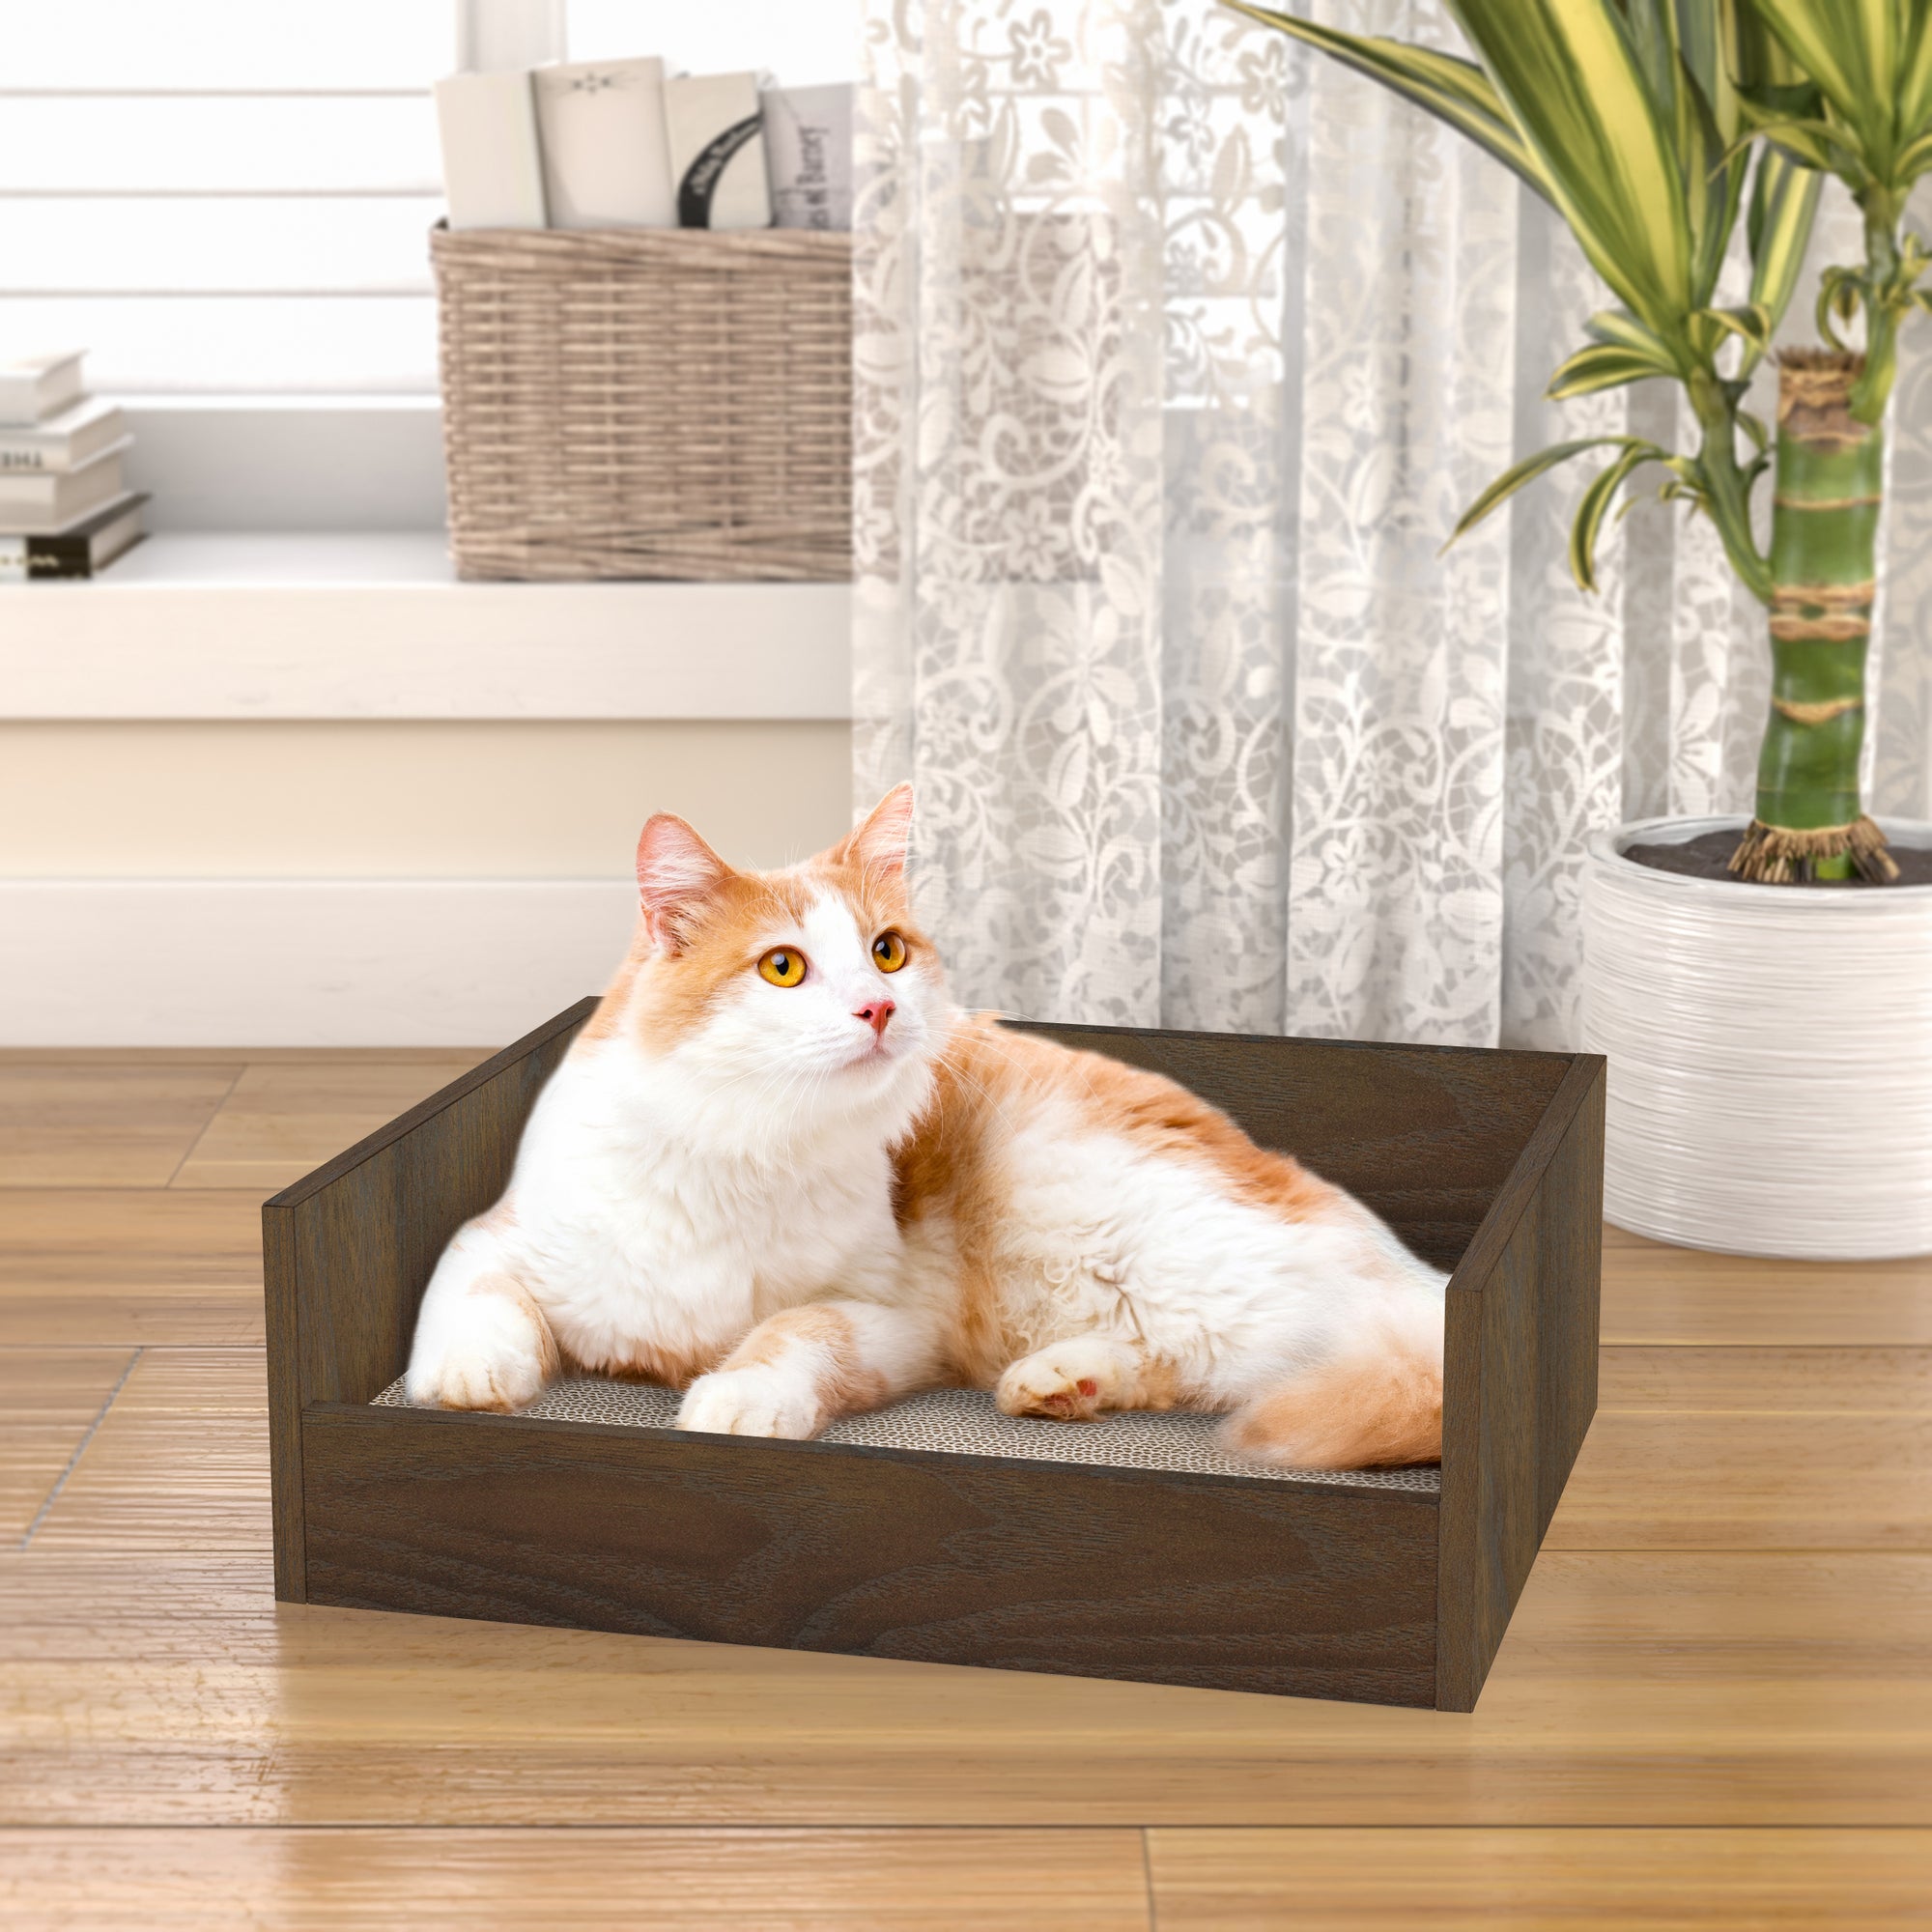 Cat Bed Deluxe with Organic Catnip in Royal Walnut - Way Basics